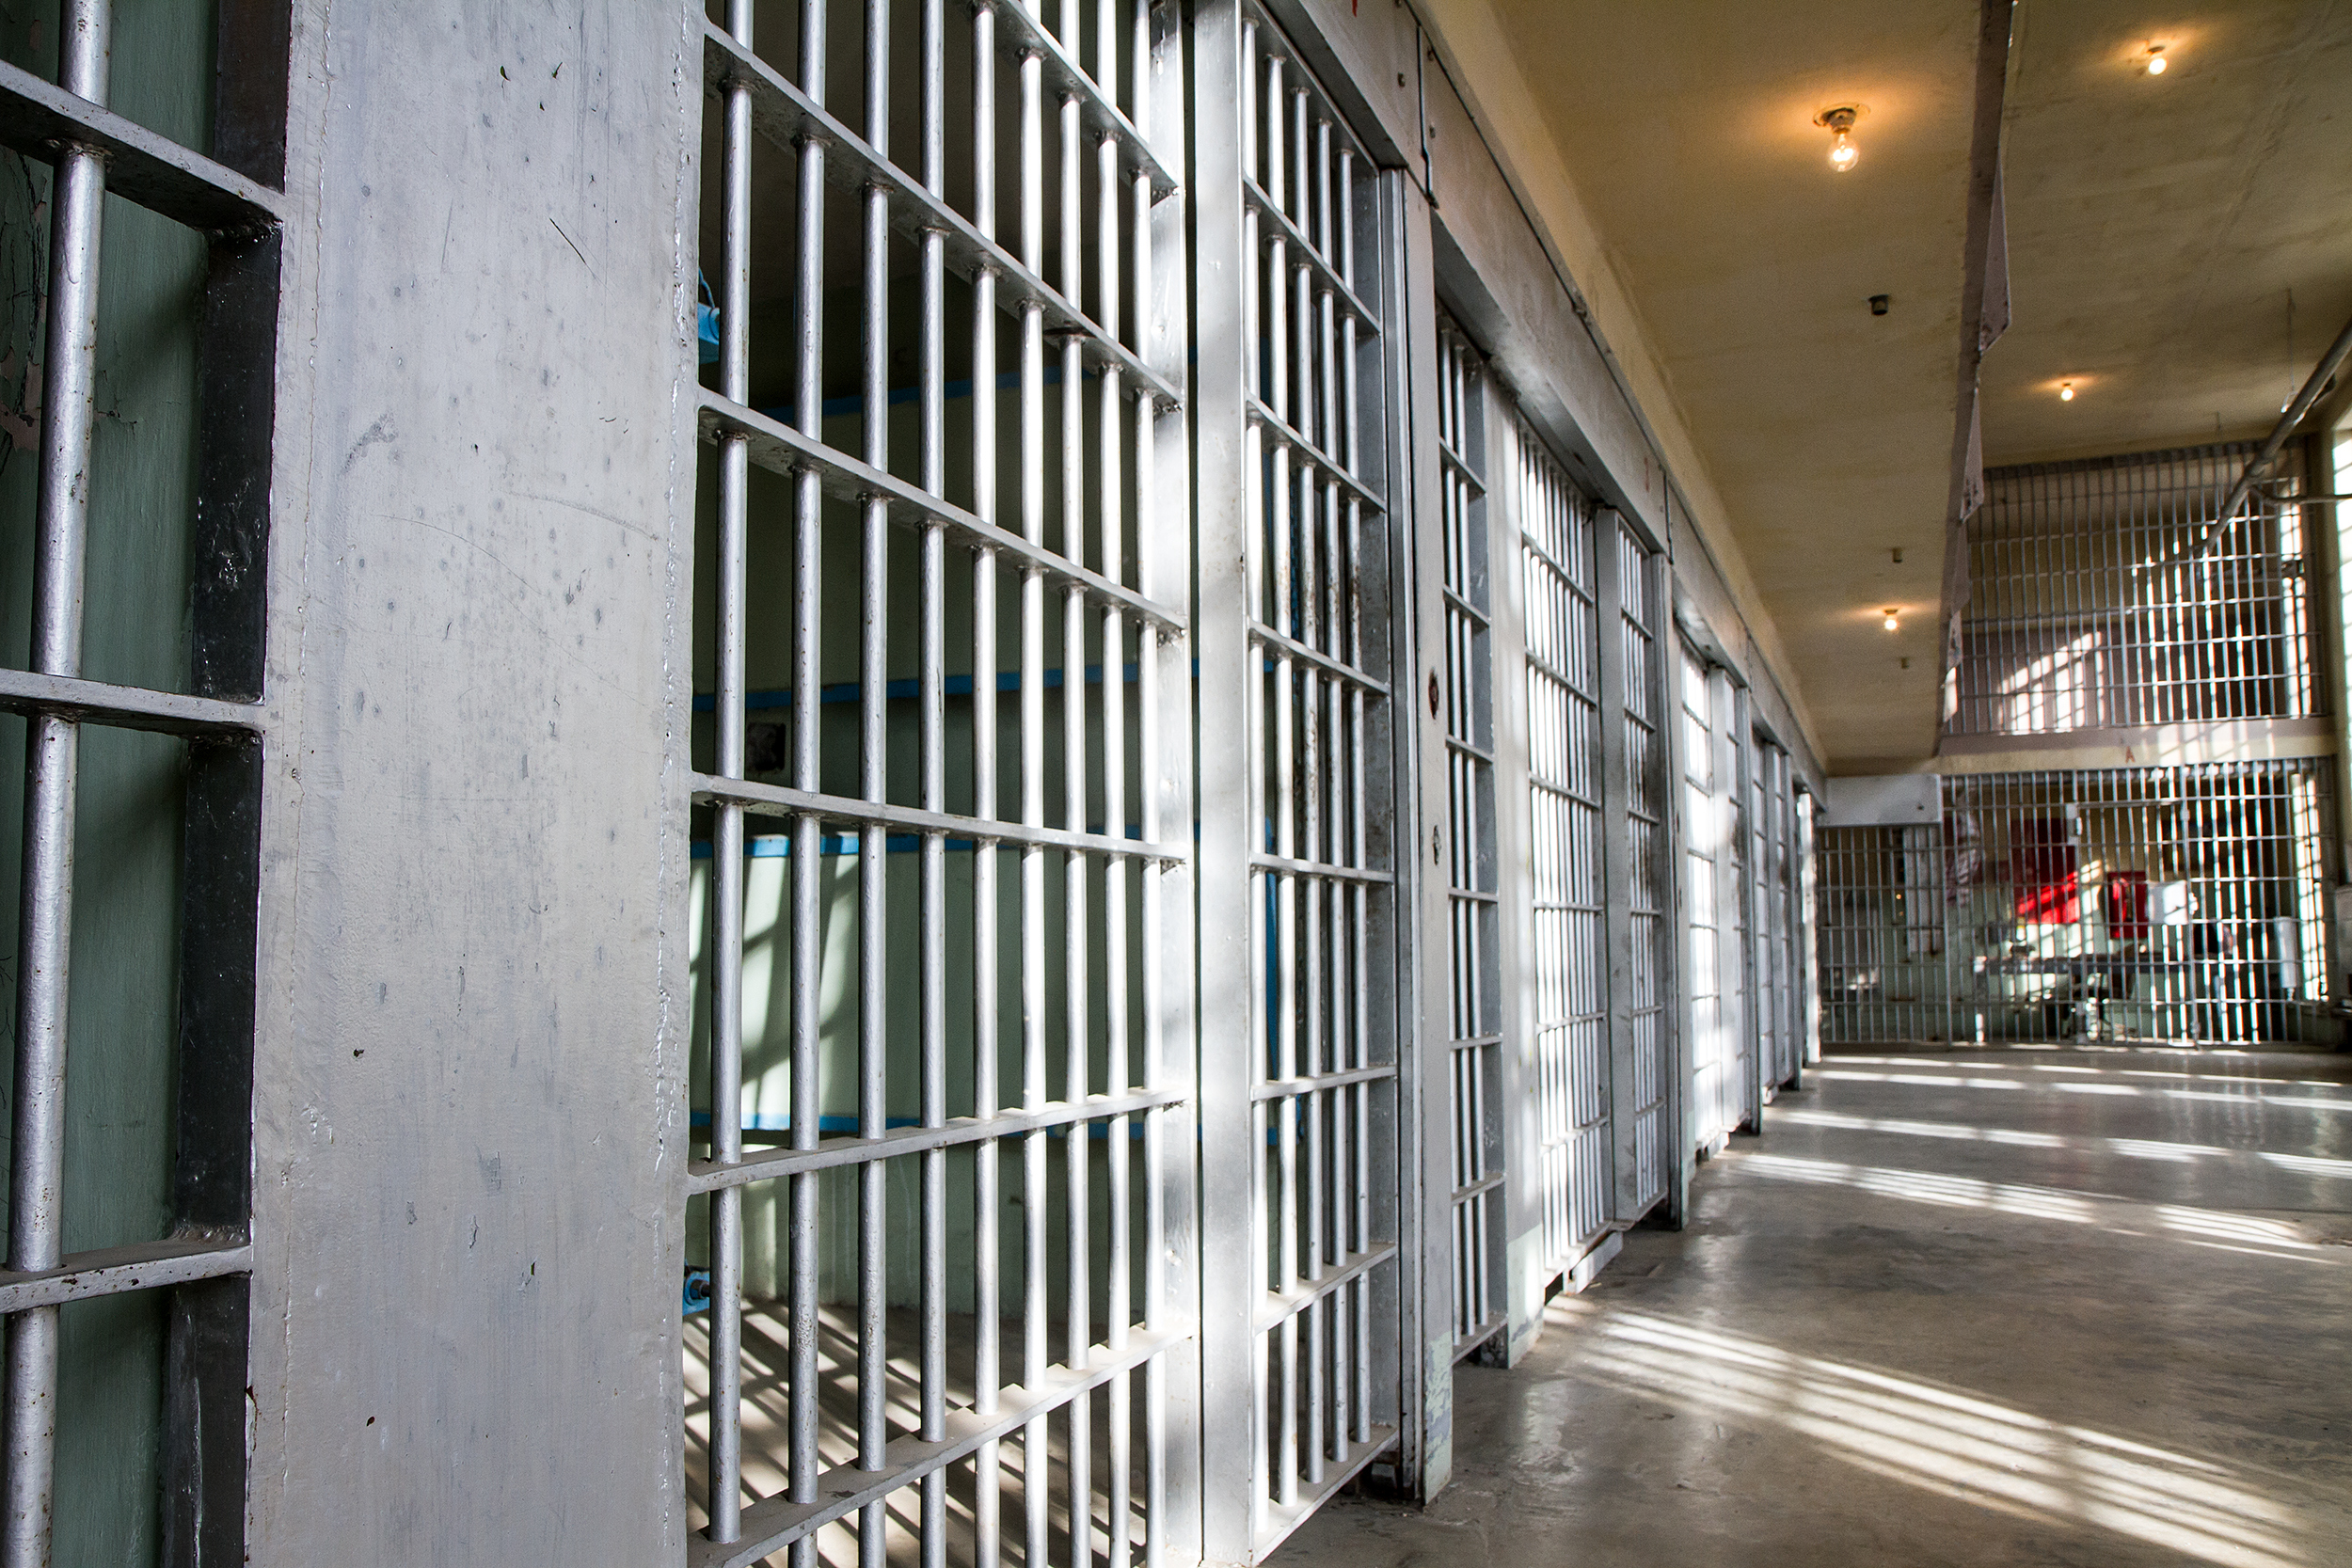 Prison cells, photo by txking/Getty Images